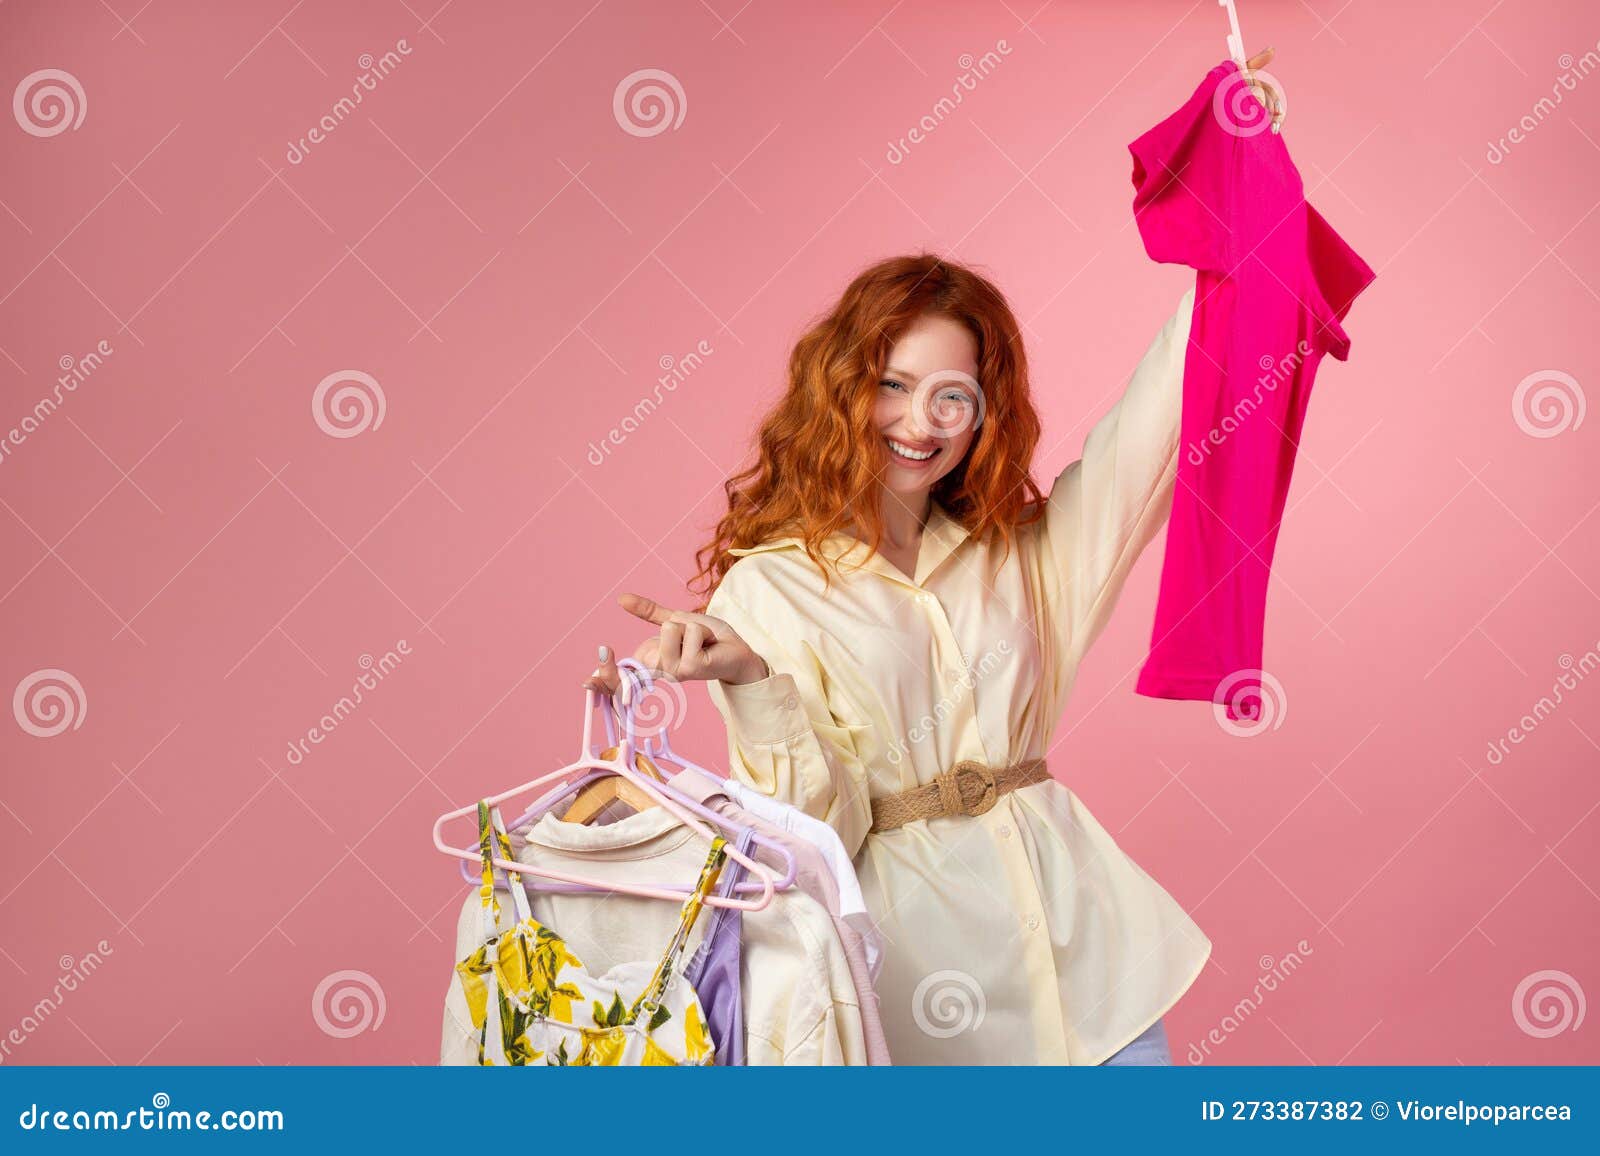 shopaholic young woman holding clothes and shooping bags on pink background.